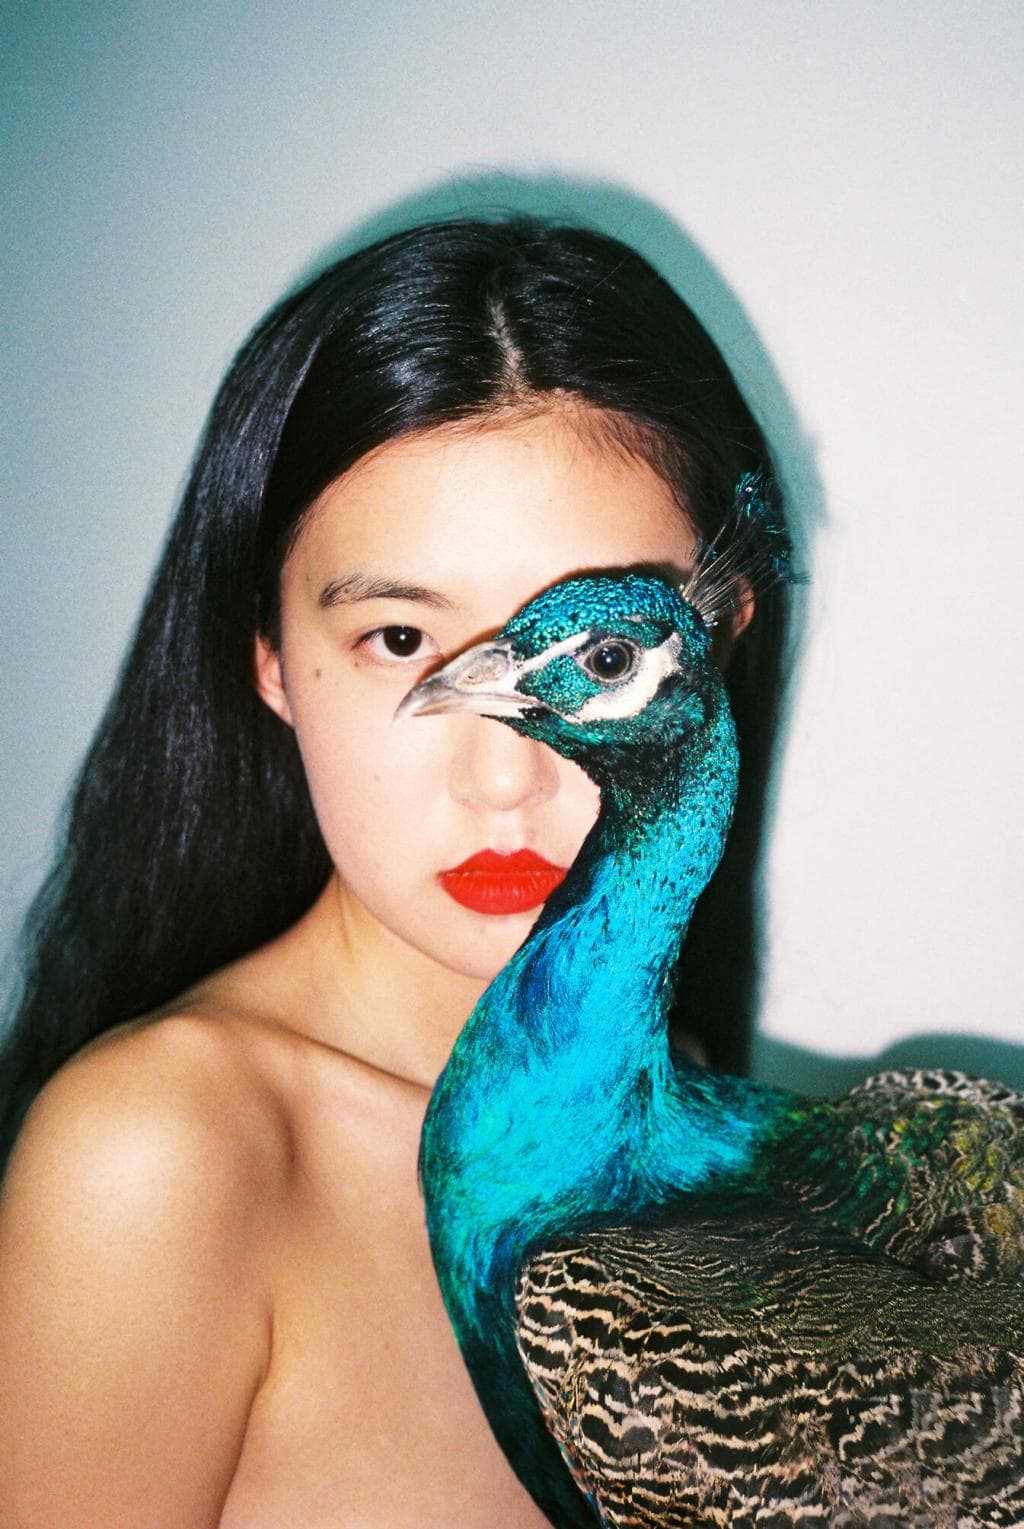 Late Ren Hang’s solo exhibitions “Naked/Nude” at Foam Fotografiemuseum, Amsterdam, the Netherlands, and “Human Love” at Fotografiska, Stockholm, Sweden